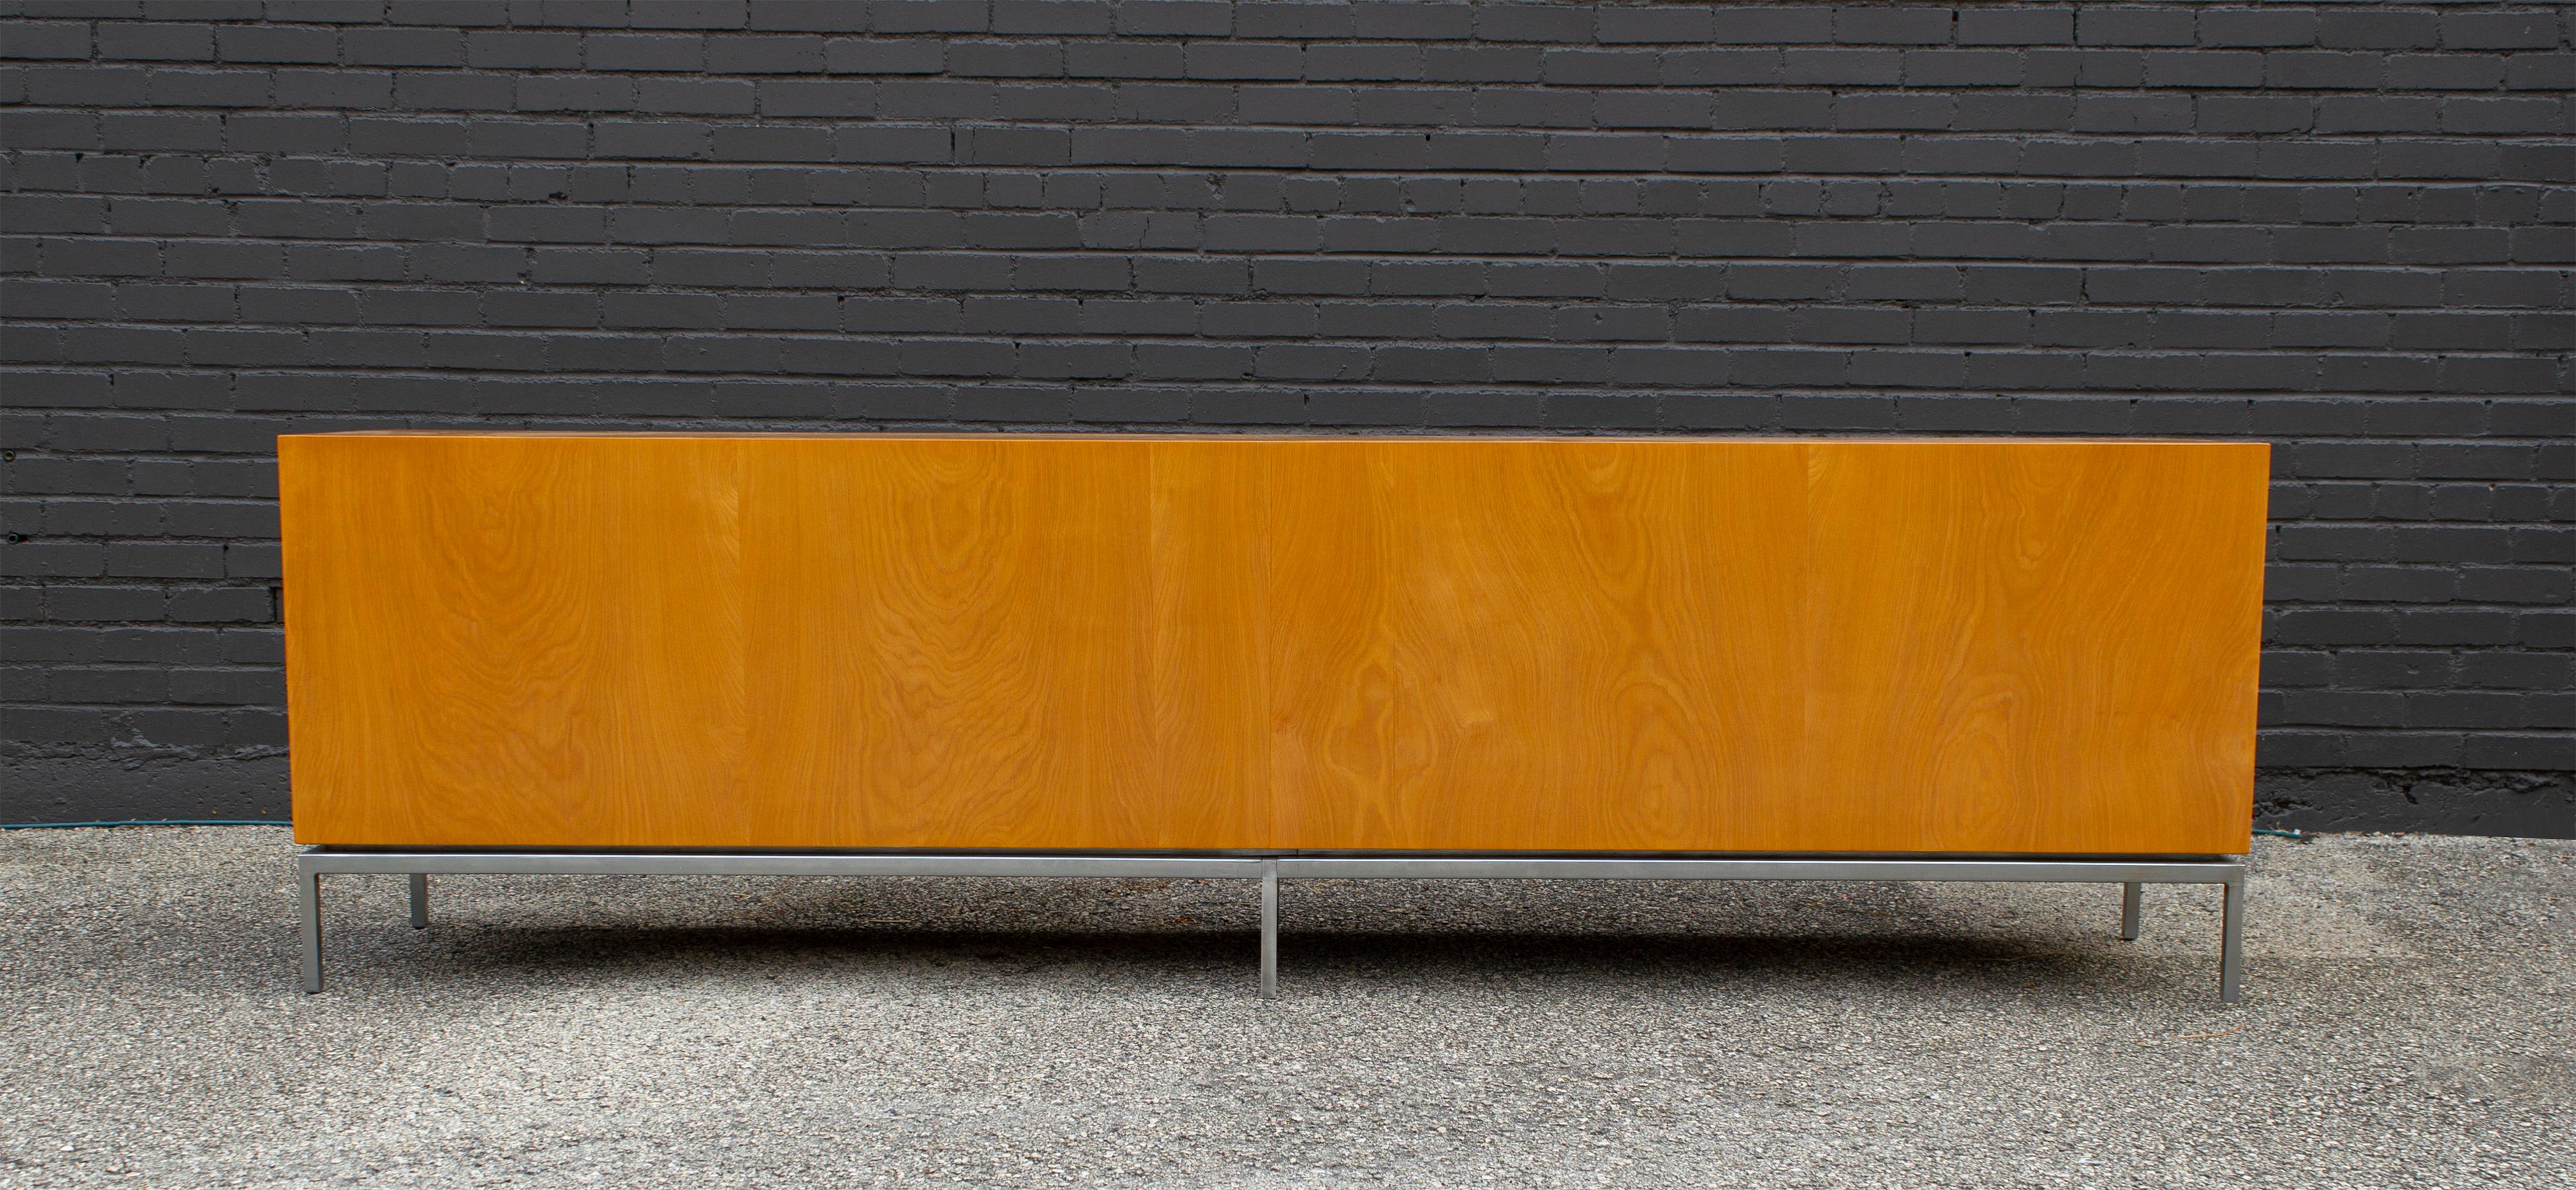 Florence Knoll Maple Credenza with Leather Pulls and Oak Drawers Early 1950s For Sale 1